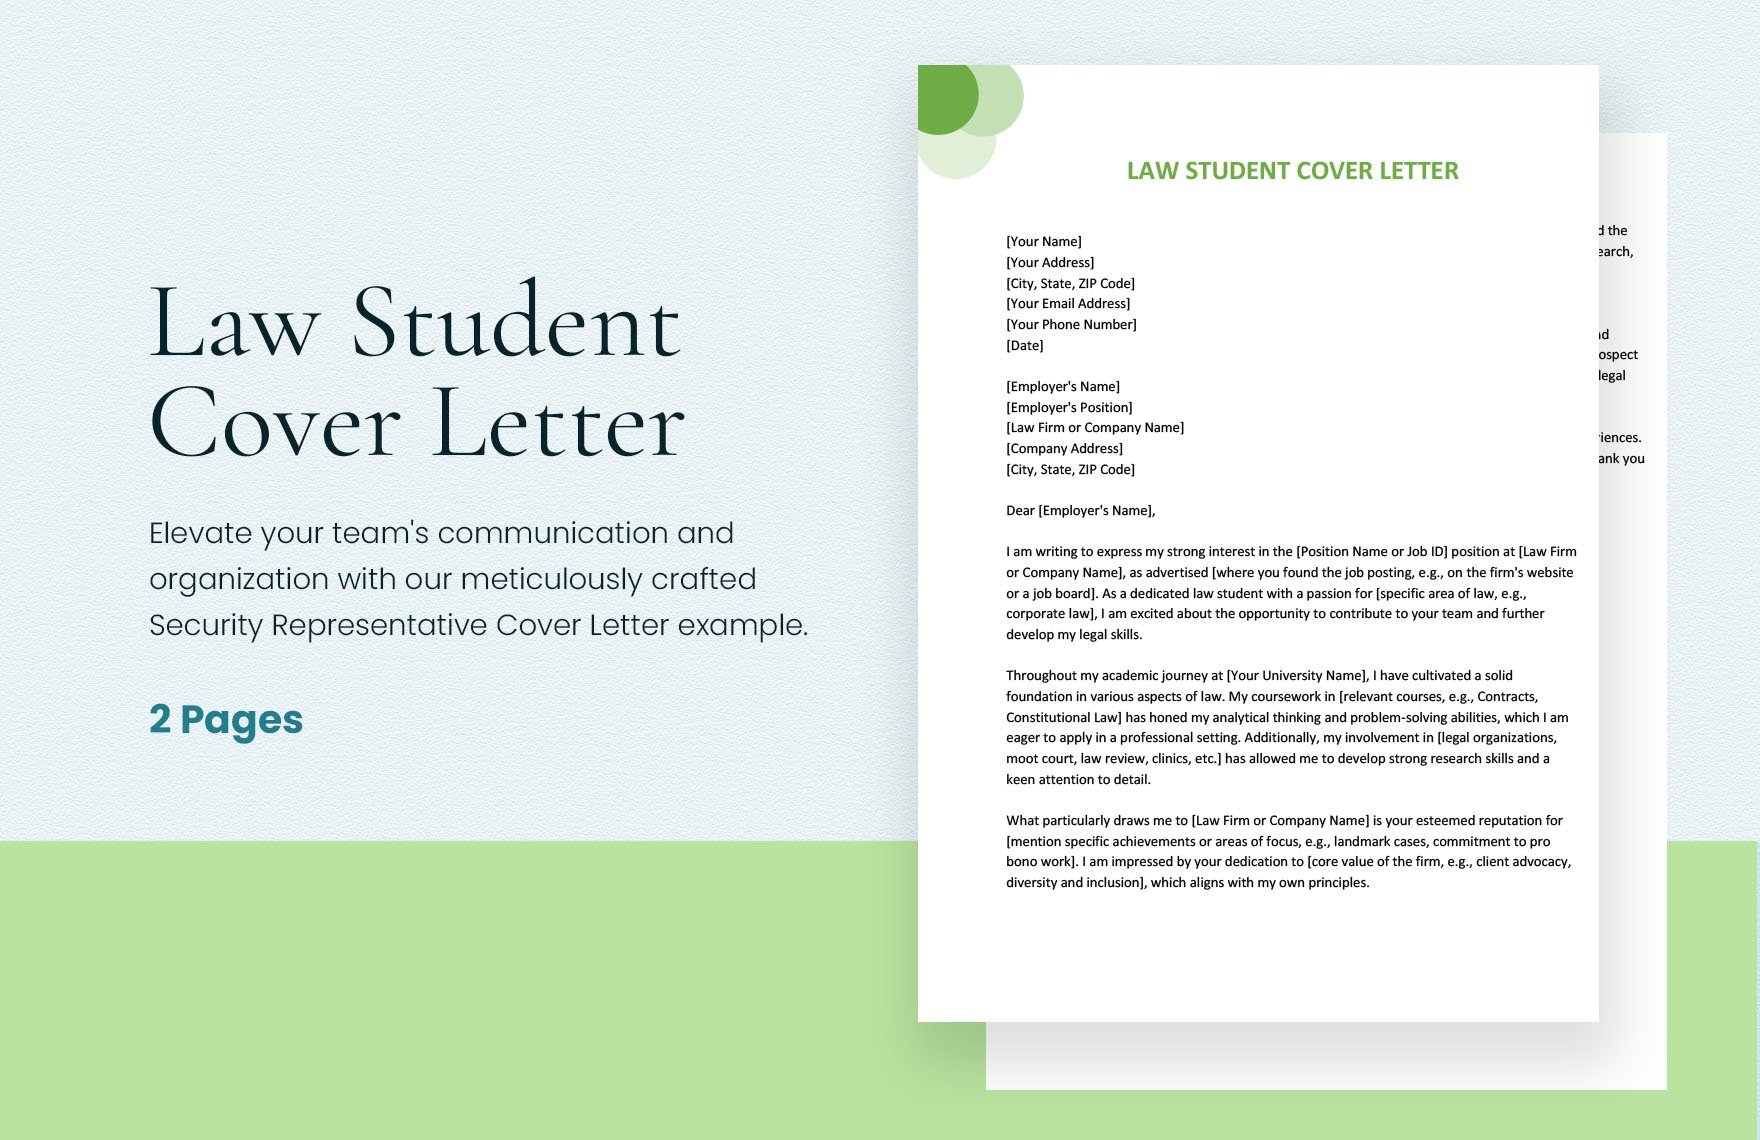 Law Student Cover Letter